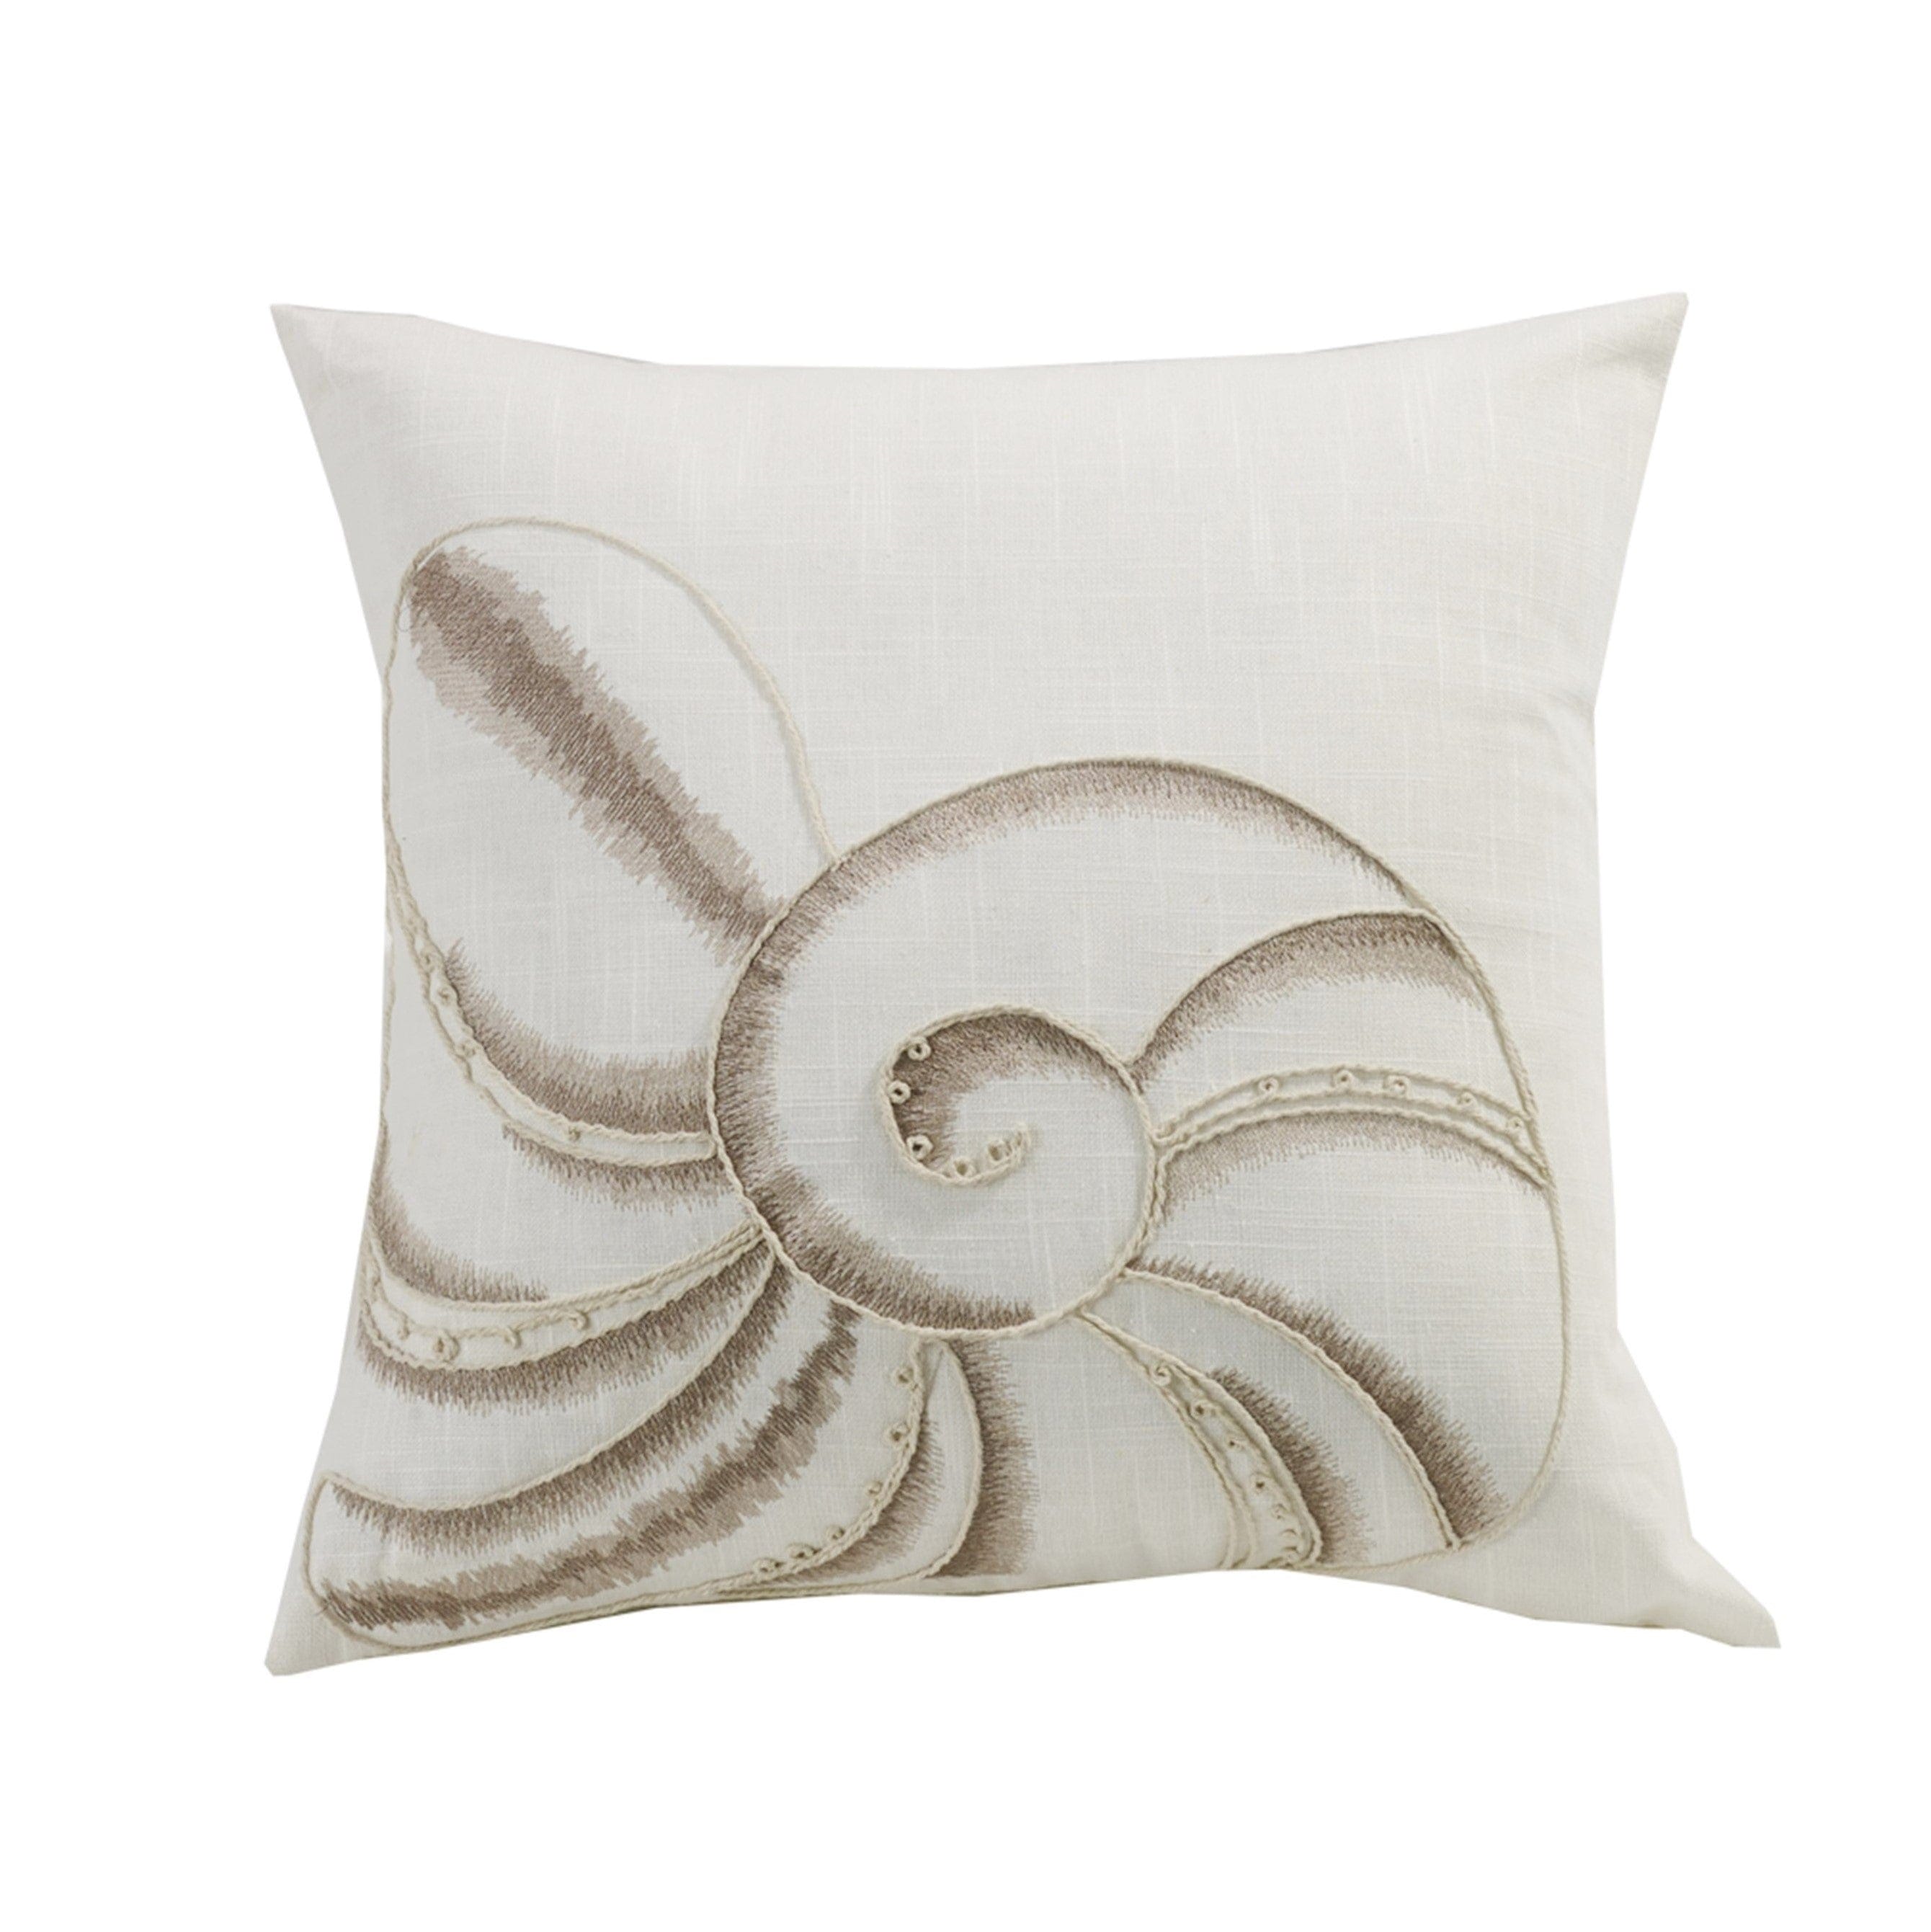 http://www.hiendaccents.com/cdn/shop/products/hiend-accents-pillow-newport-seashell-embroidery-throw-pillow-18x18-fb5400p5-16299480186983.jpg?v=1662610487